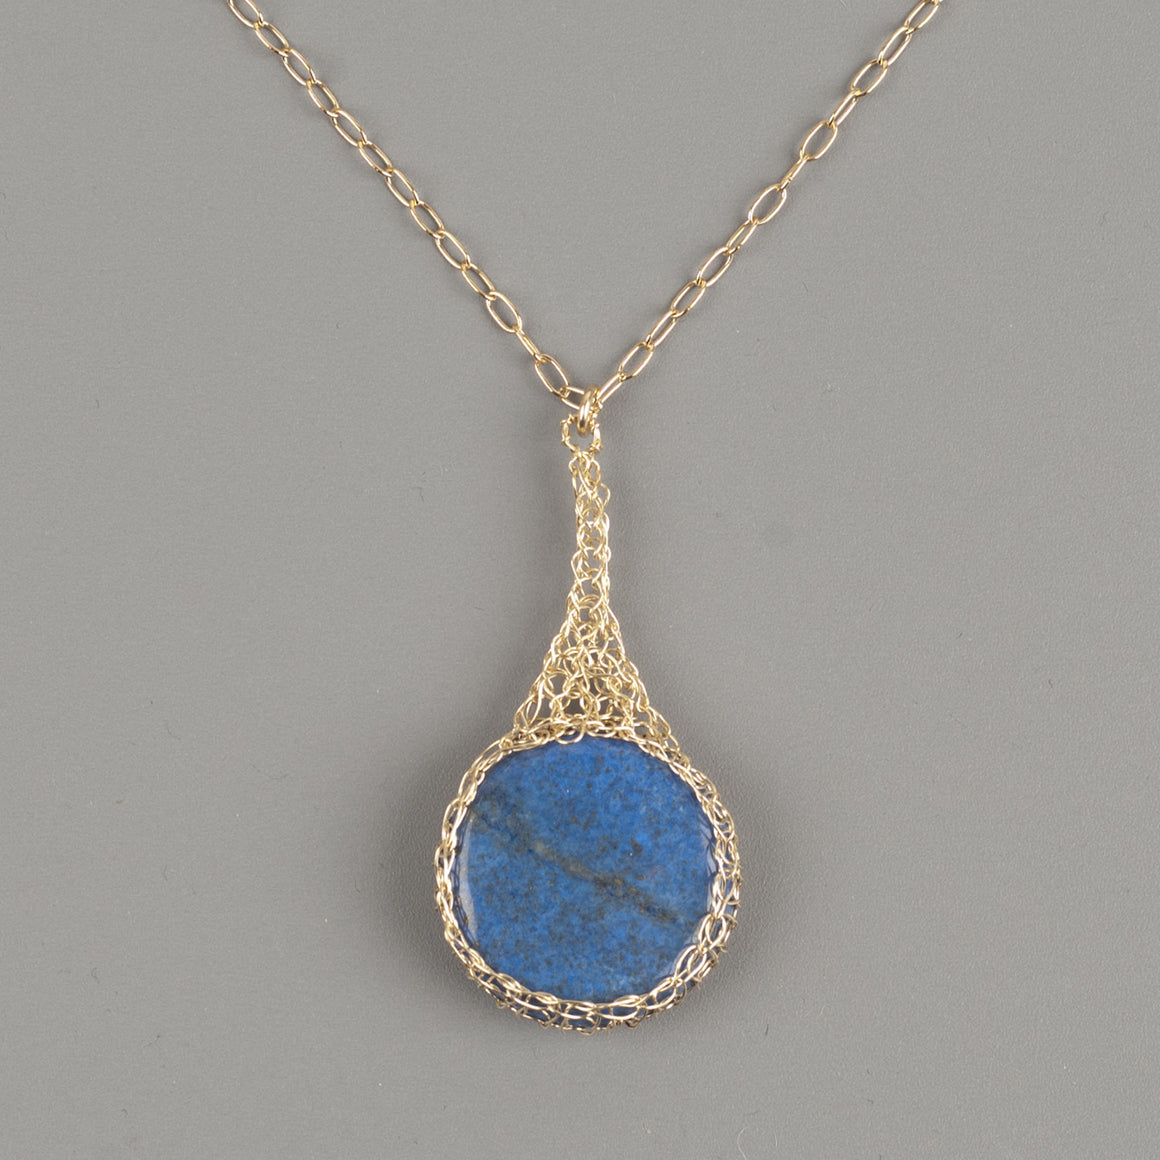 Blue Lapis lazuli pendant necklace wire crocheted in gold wire - Yooladesign